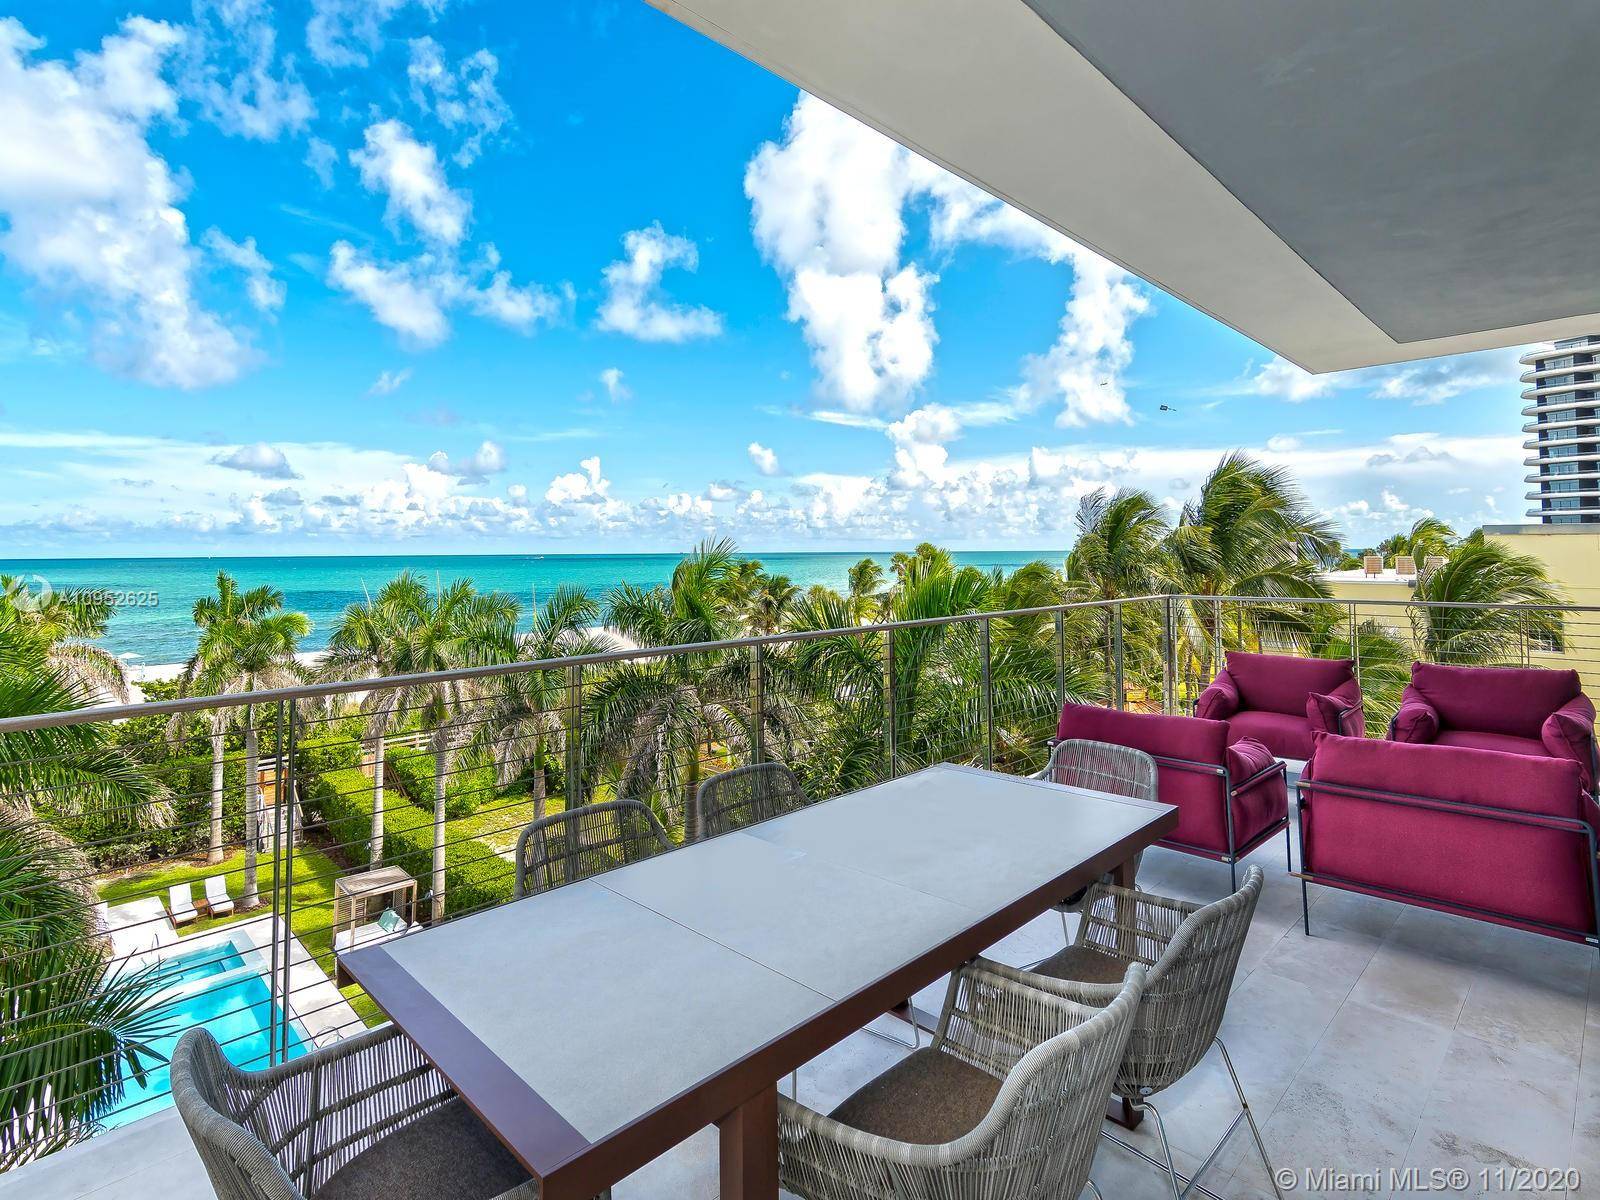 Looking for privacy ? One of the most exclusive buildings in Miami with 7 units only.